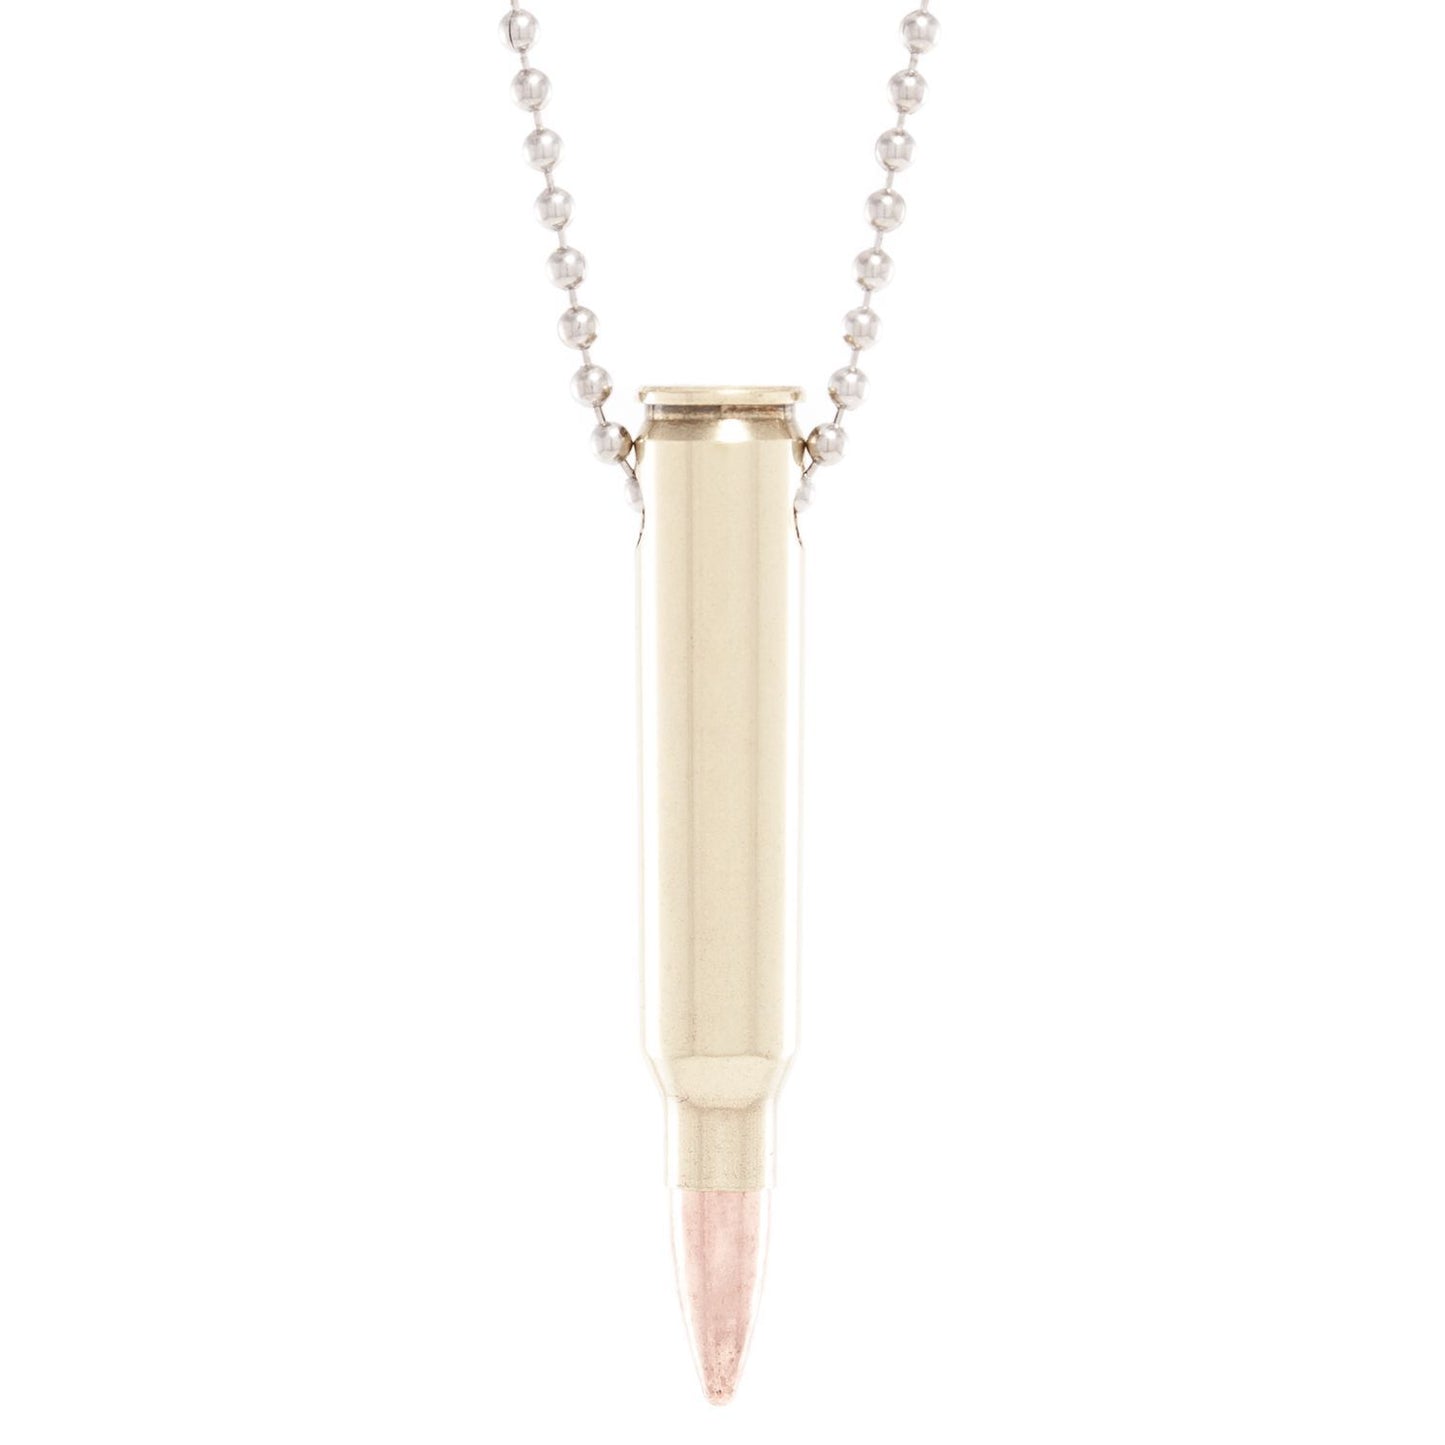 Lucky Shot Bullet Necklace .223 Caliber Ball Chain Necklace